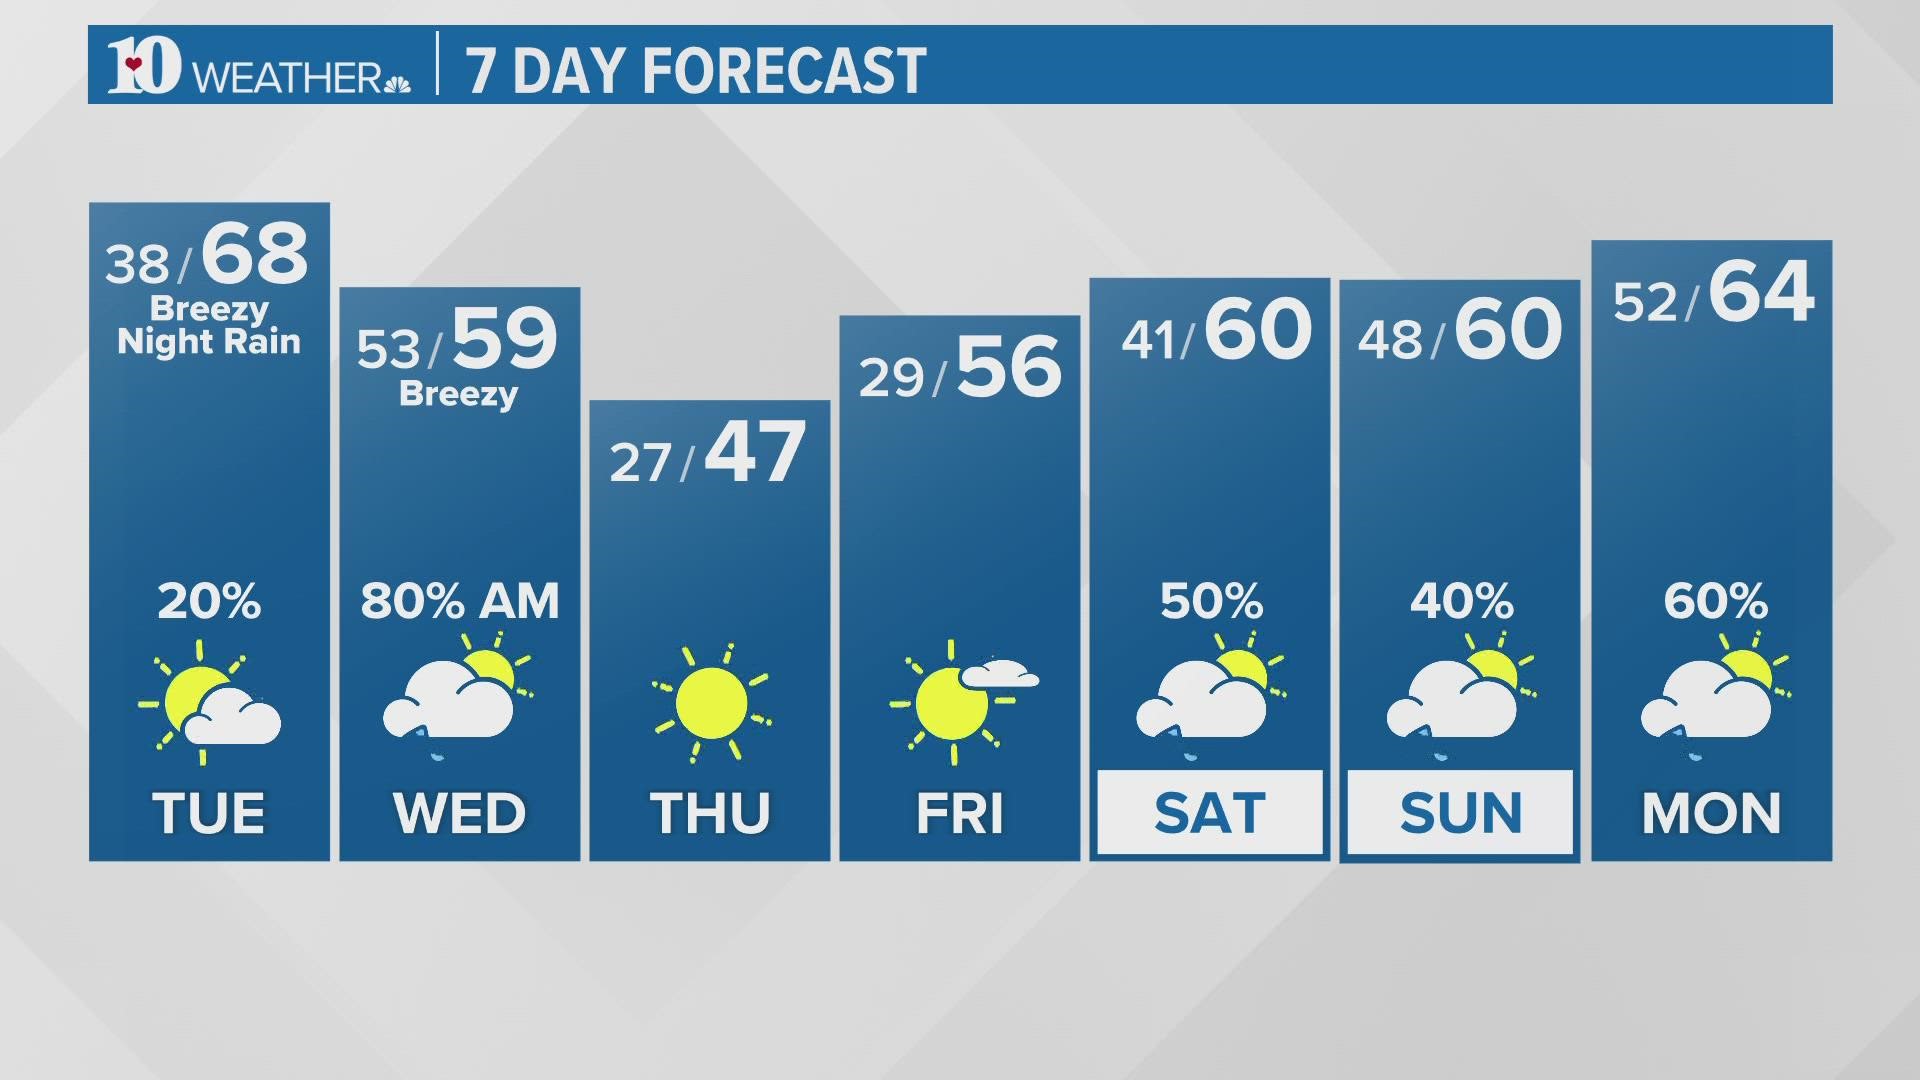 Mostly sunny and mild with highs in the middle 60s. Rain late with lows in the low 50s Tuesday night.